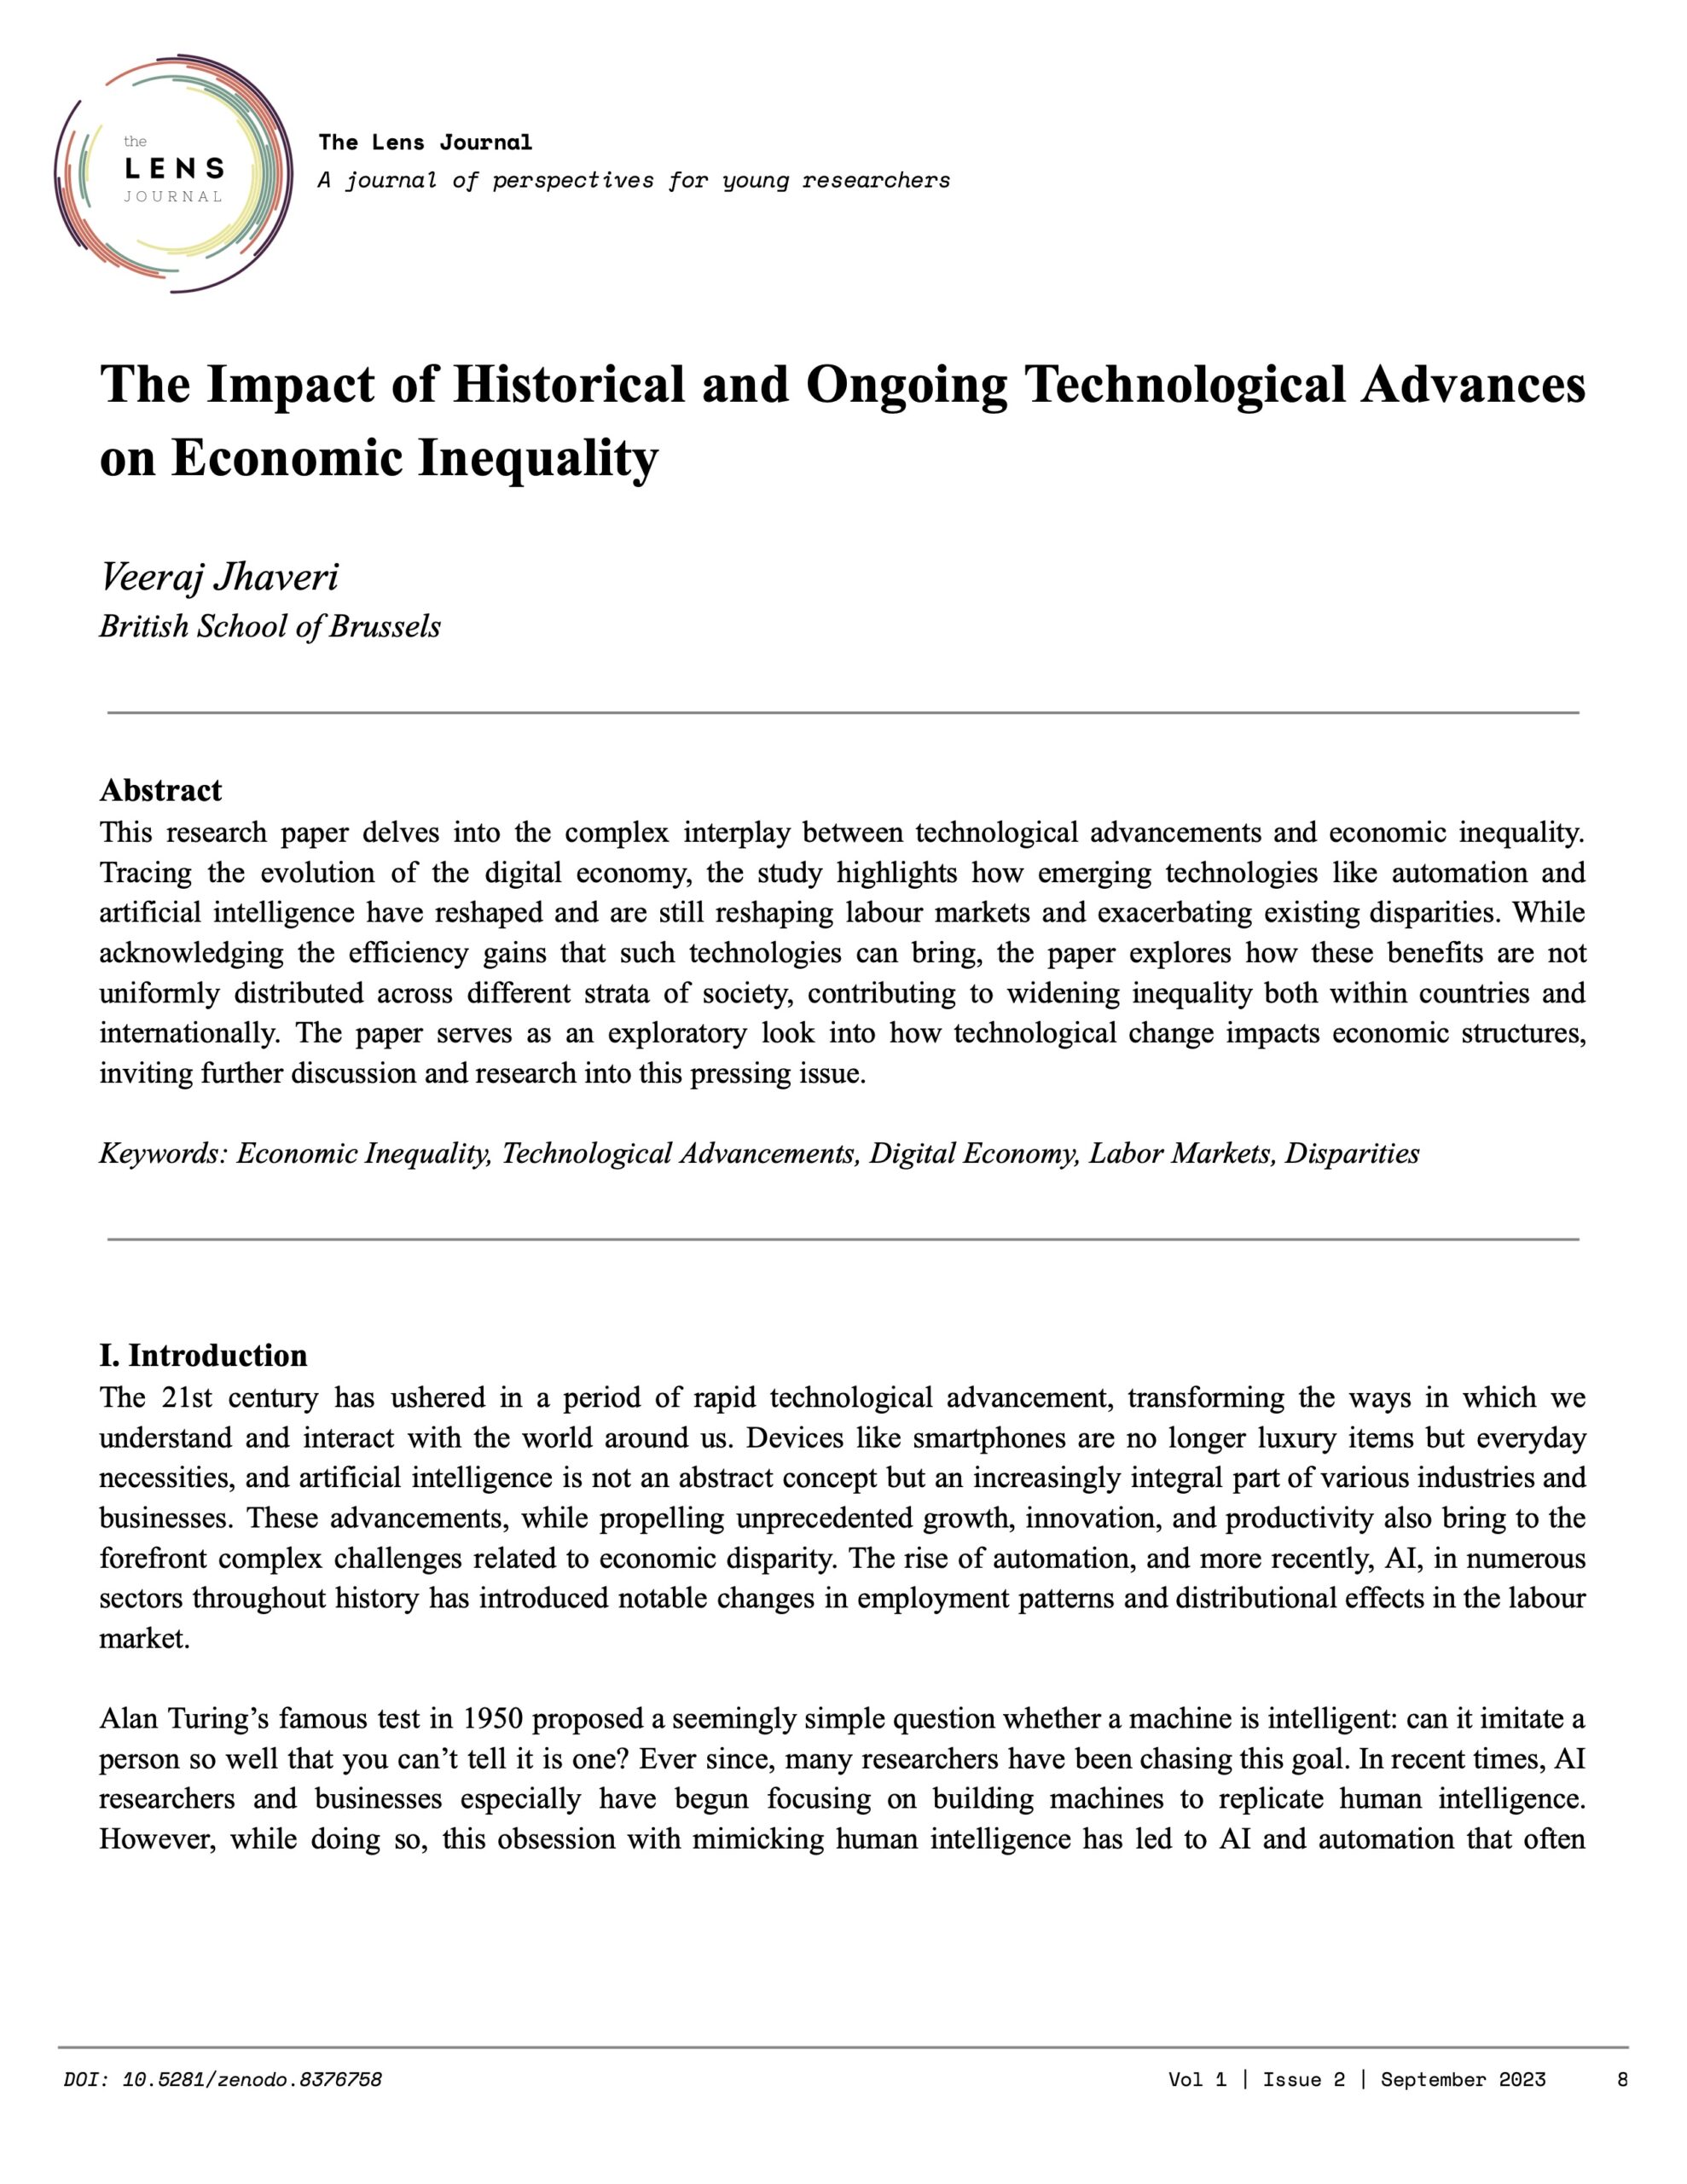 The Impact of Historical and Ongoing Technological Advances on Economic Inequality